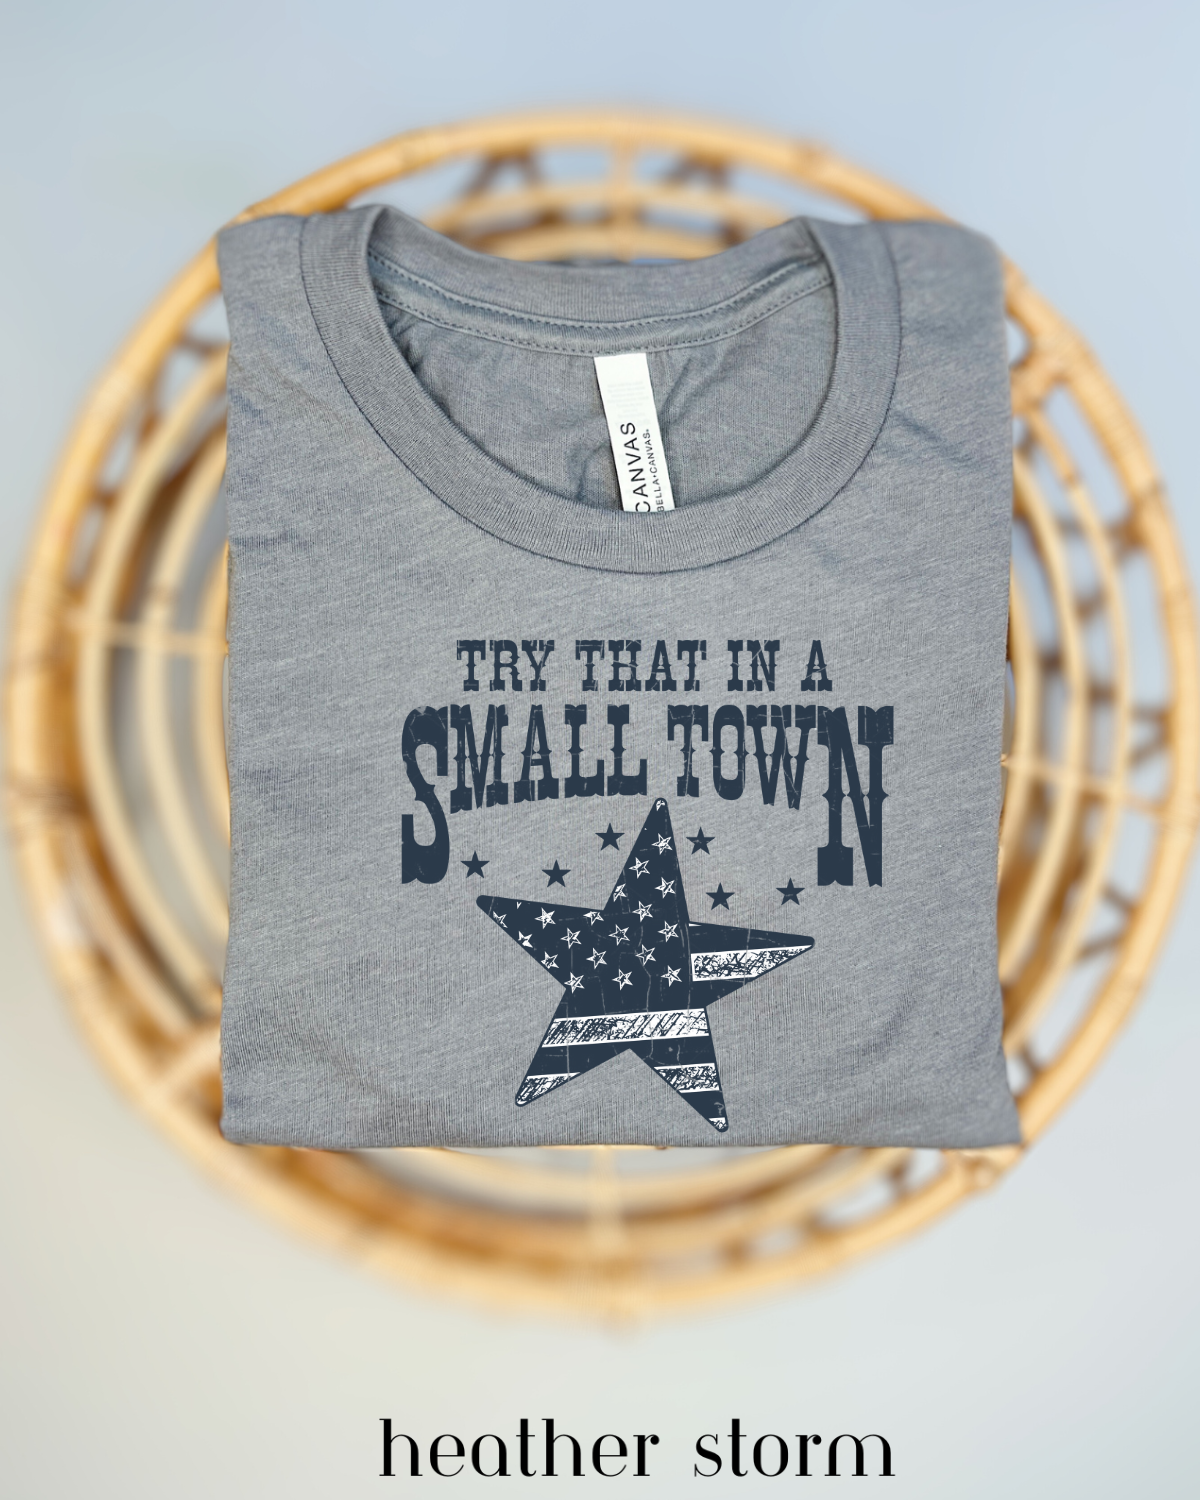 Try That In A Small Town - American Star Tee